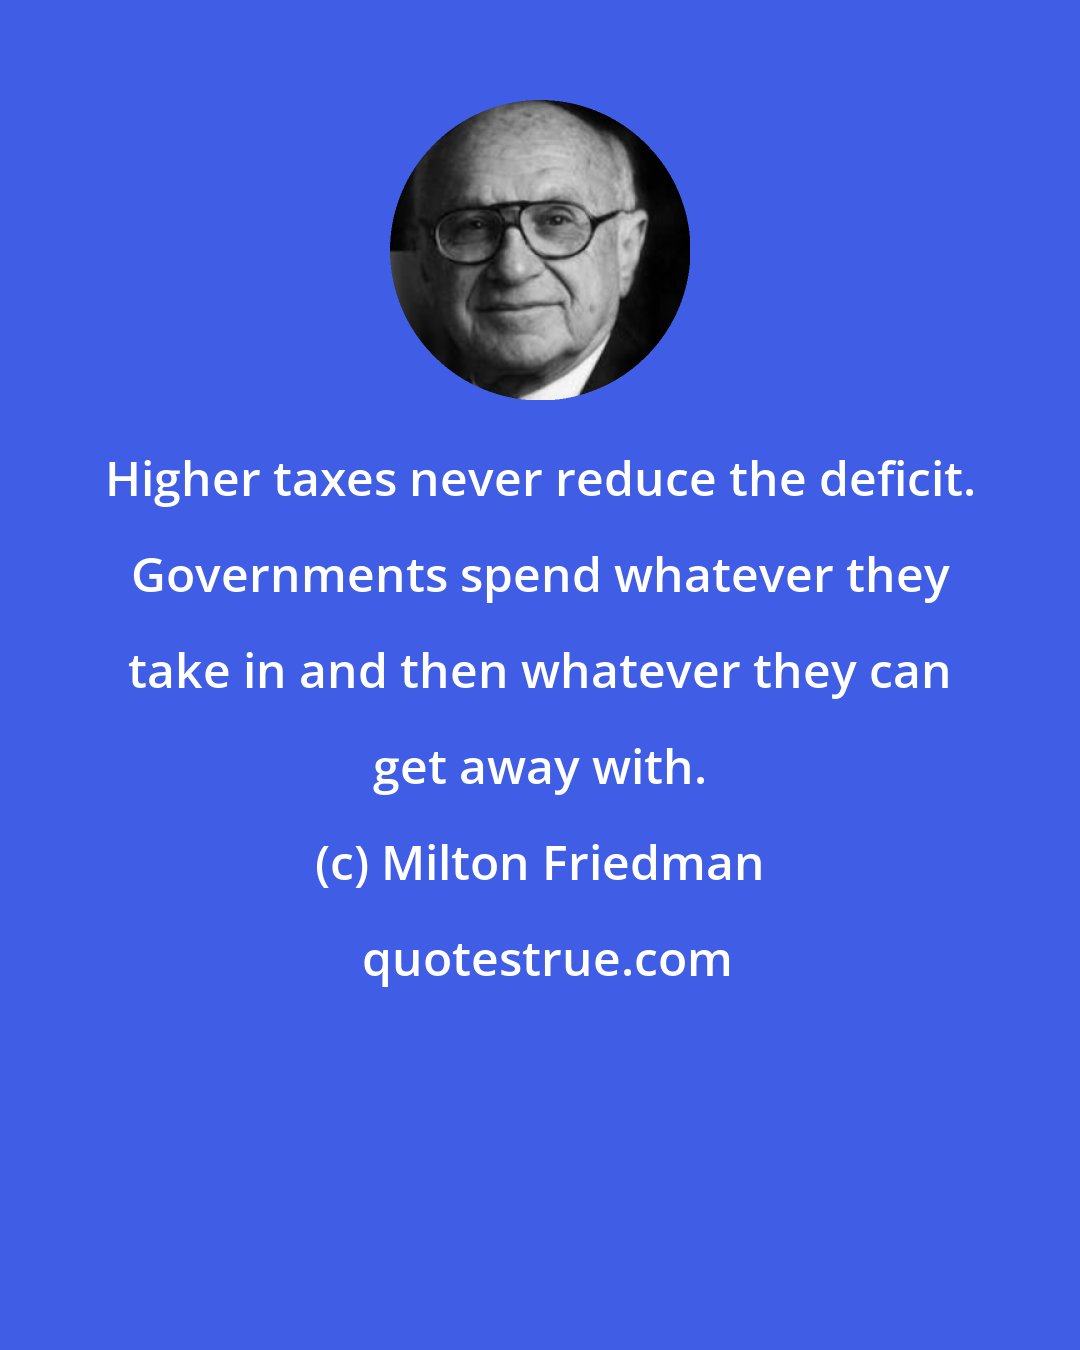 Milton Friedman: Higher taxes never reduce the deficit. Governments spend whatever they take in and then whatever they can get away with.